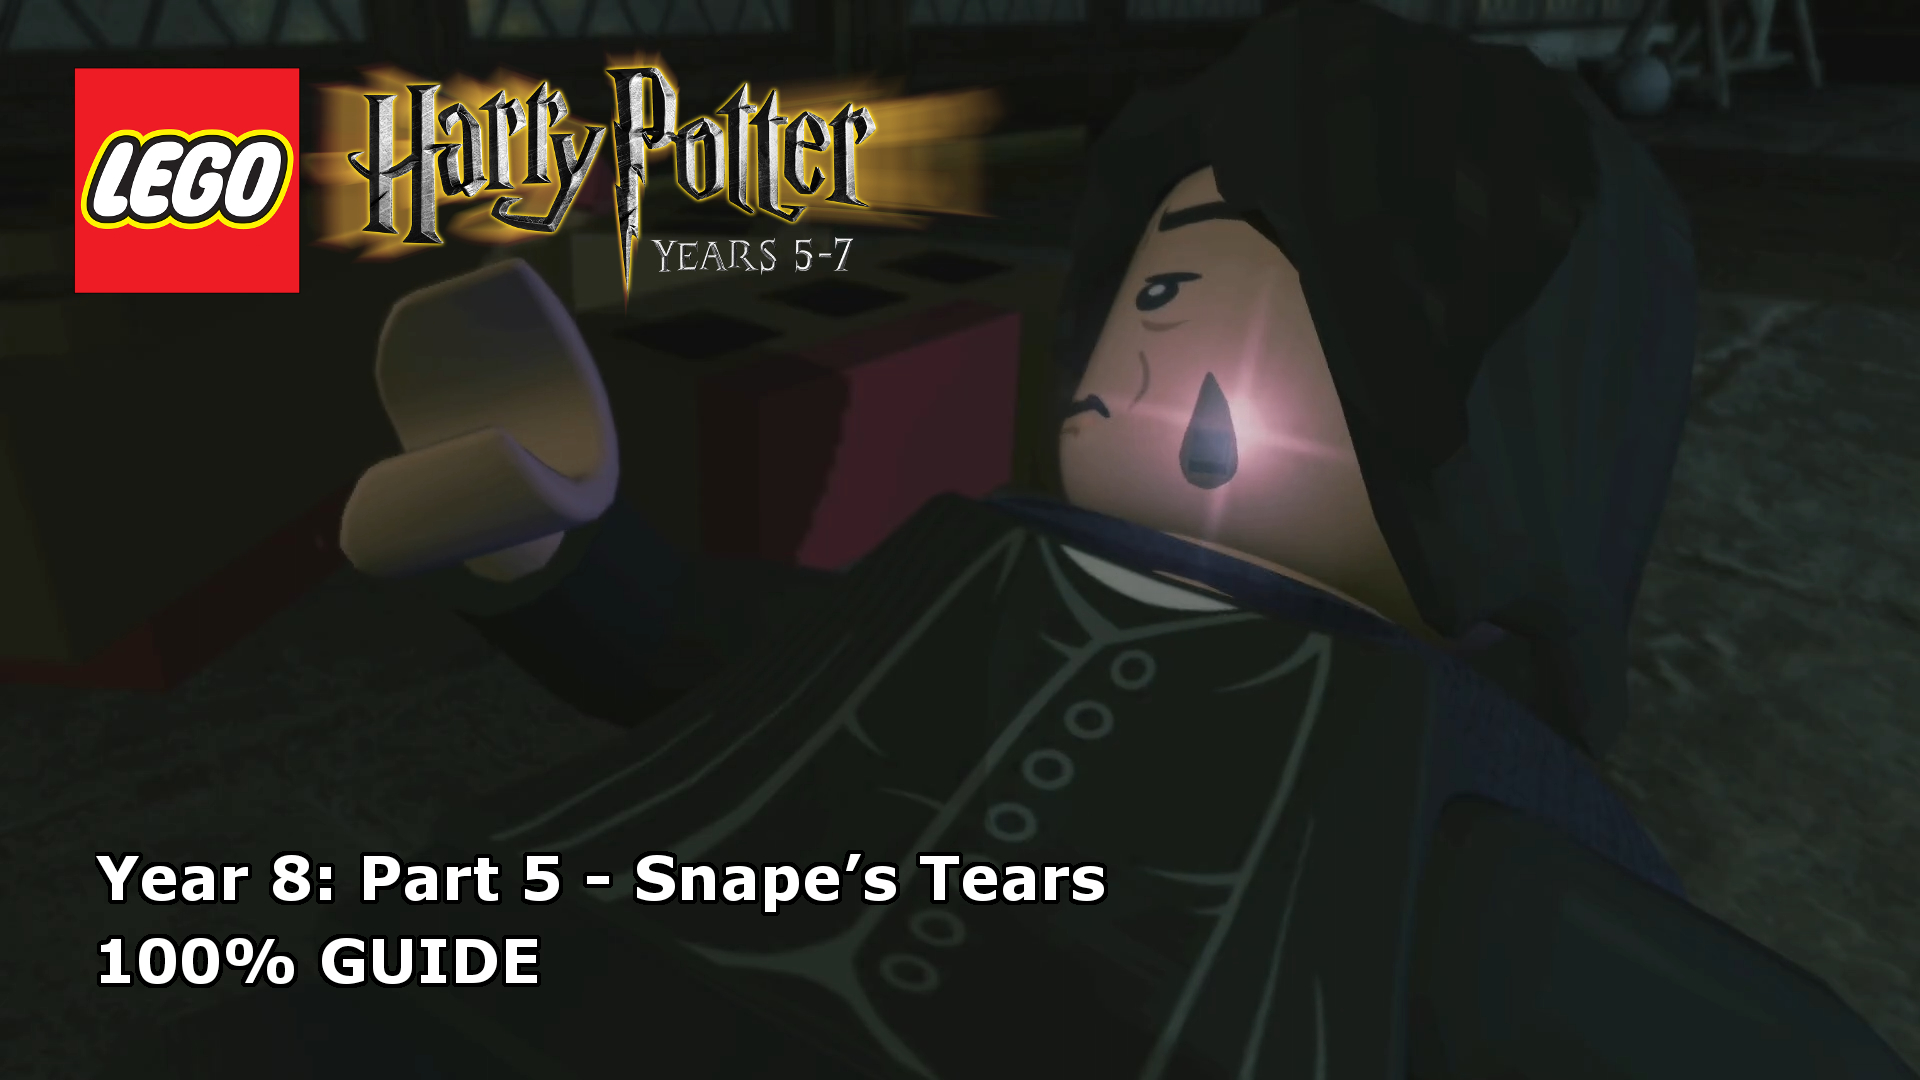 Lego Harry Potter: Years 5-7 – Dumbledore's Army 100% Guide